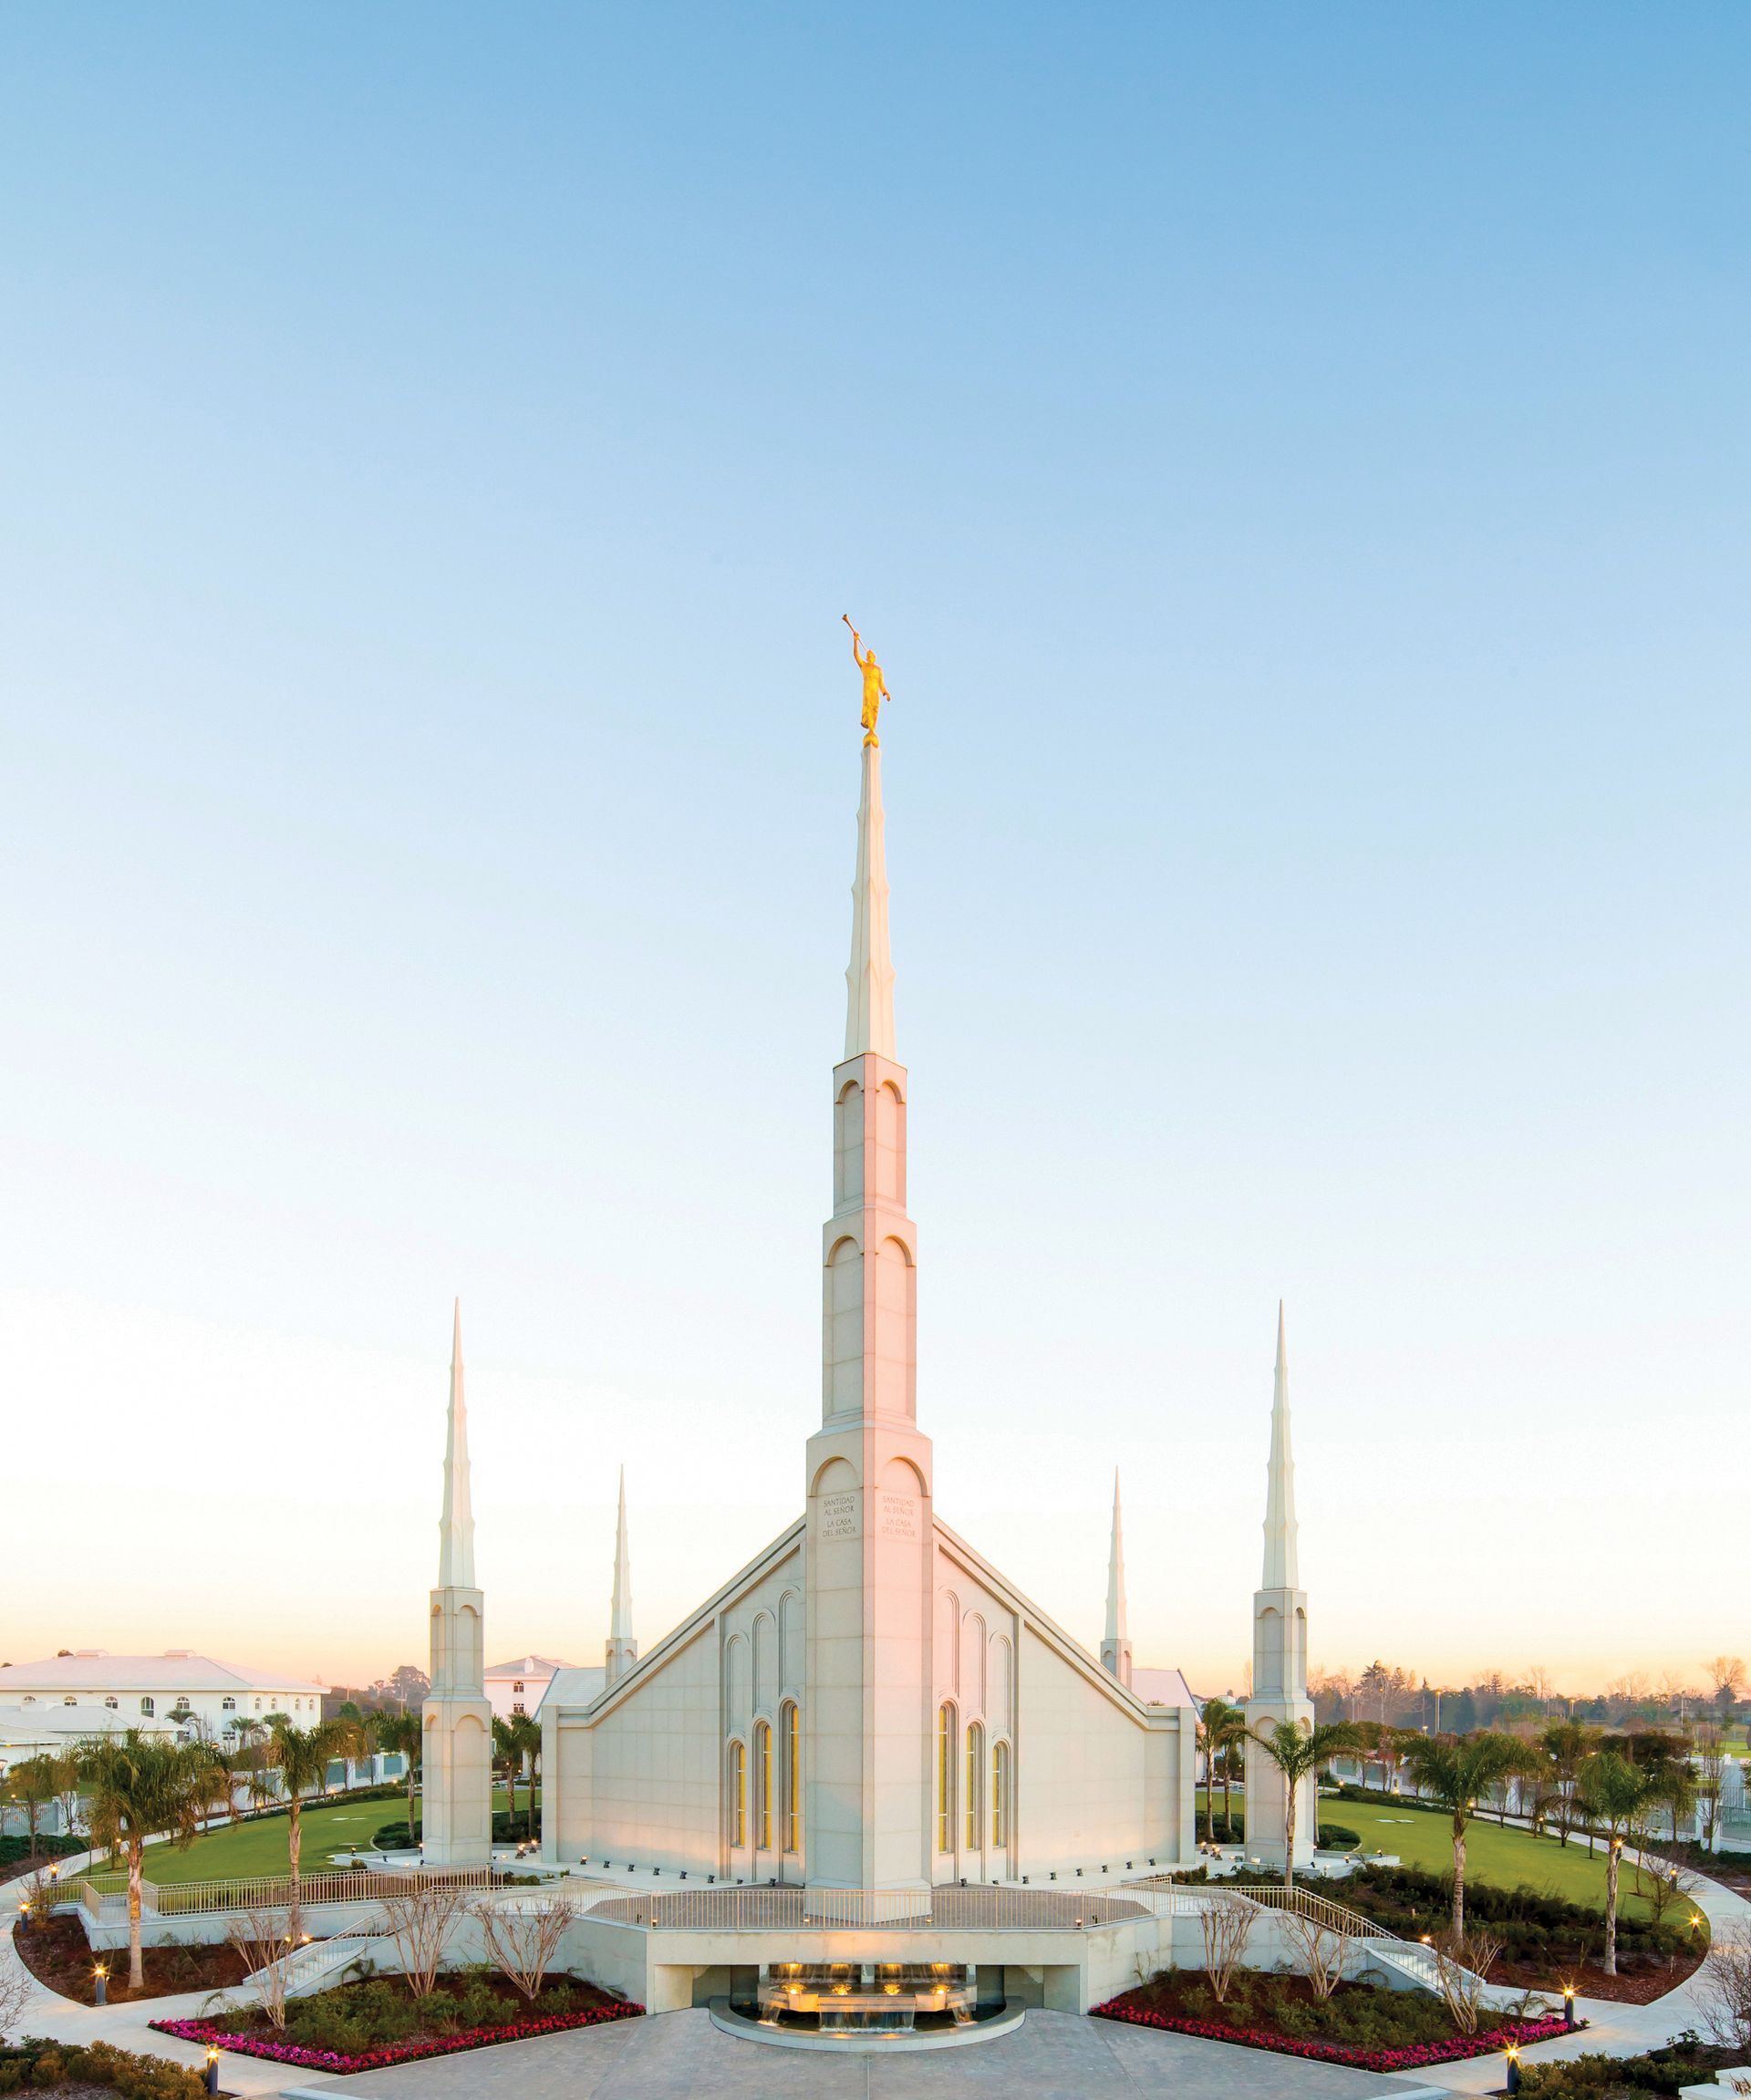 An exterior portrait view of the Buenos Aires Argentina Temple.